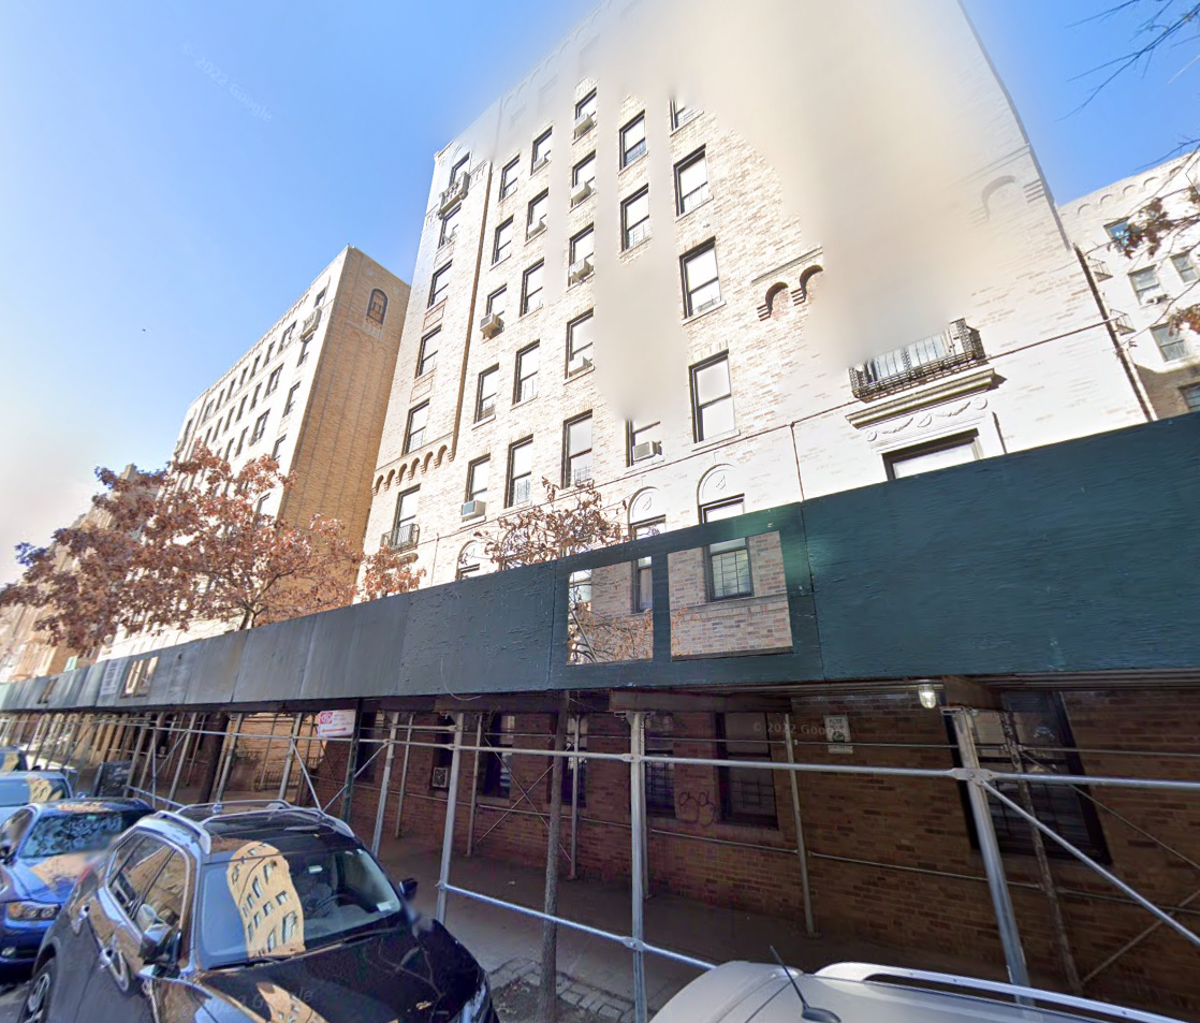 Three-year-old girl miraculously expected to survive fall from third-storey window in the Bronx